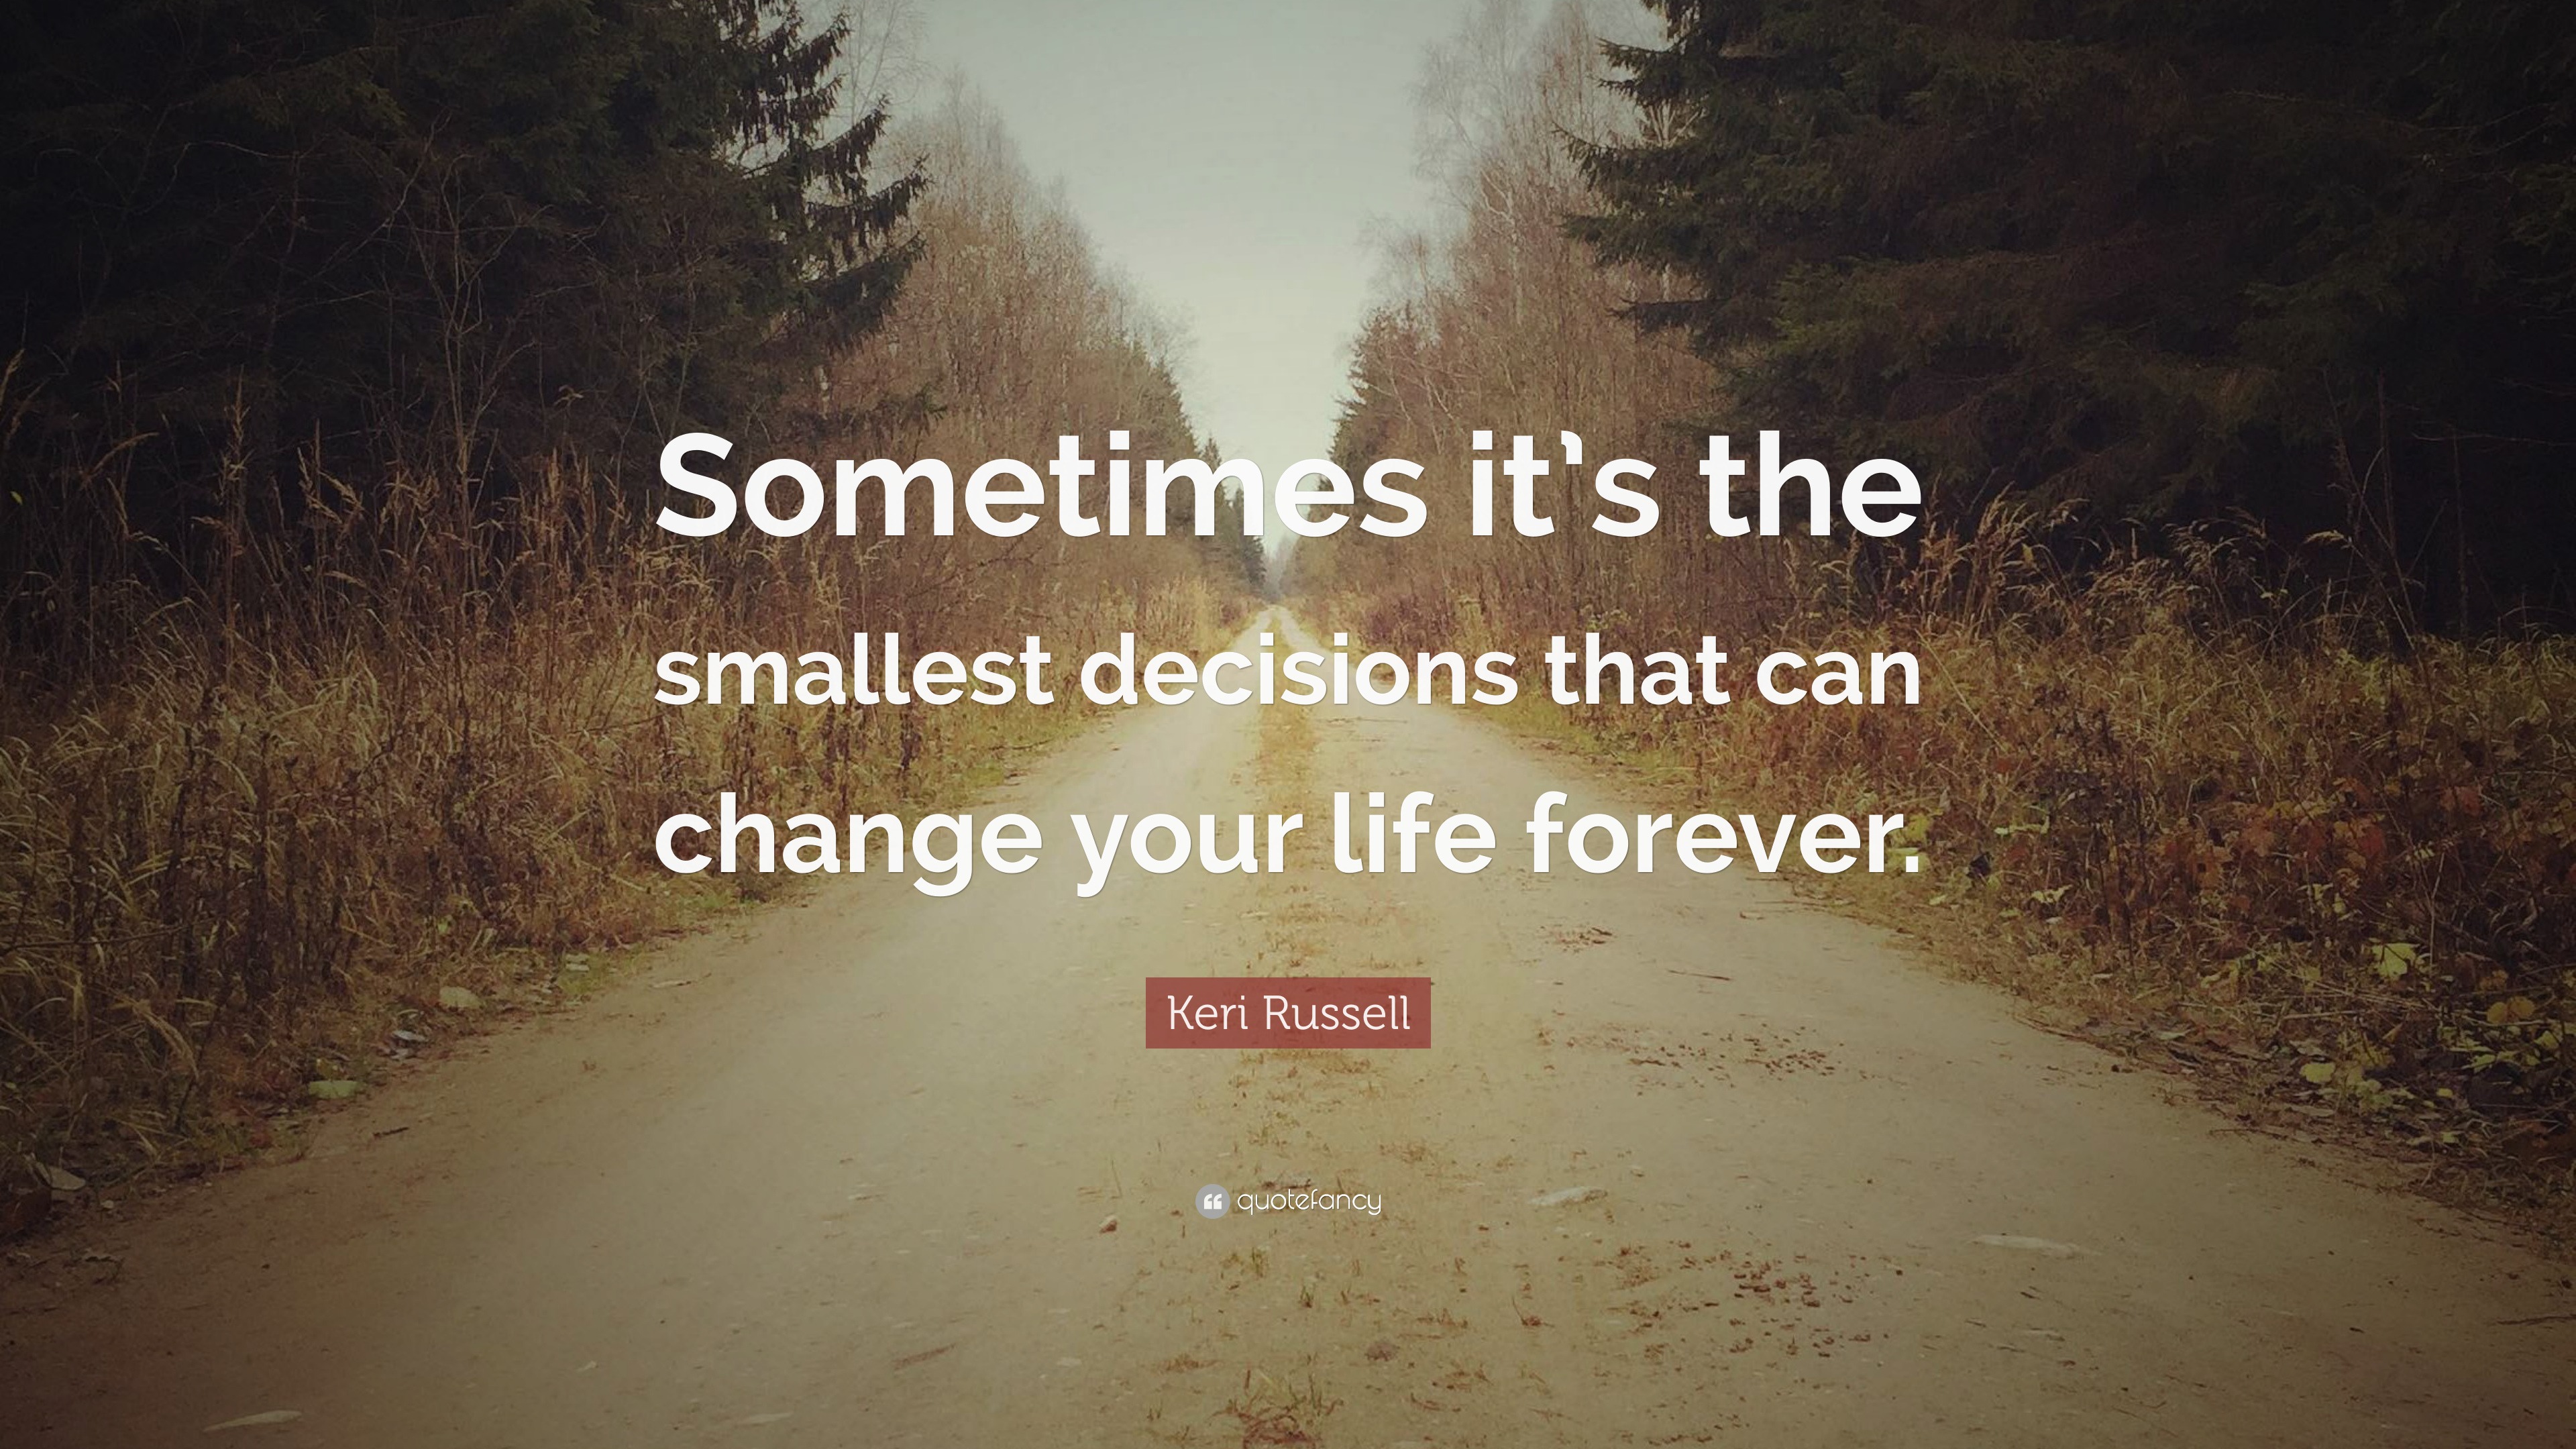 Keri Russell Quote “Sometimes it’s the smallest decisions